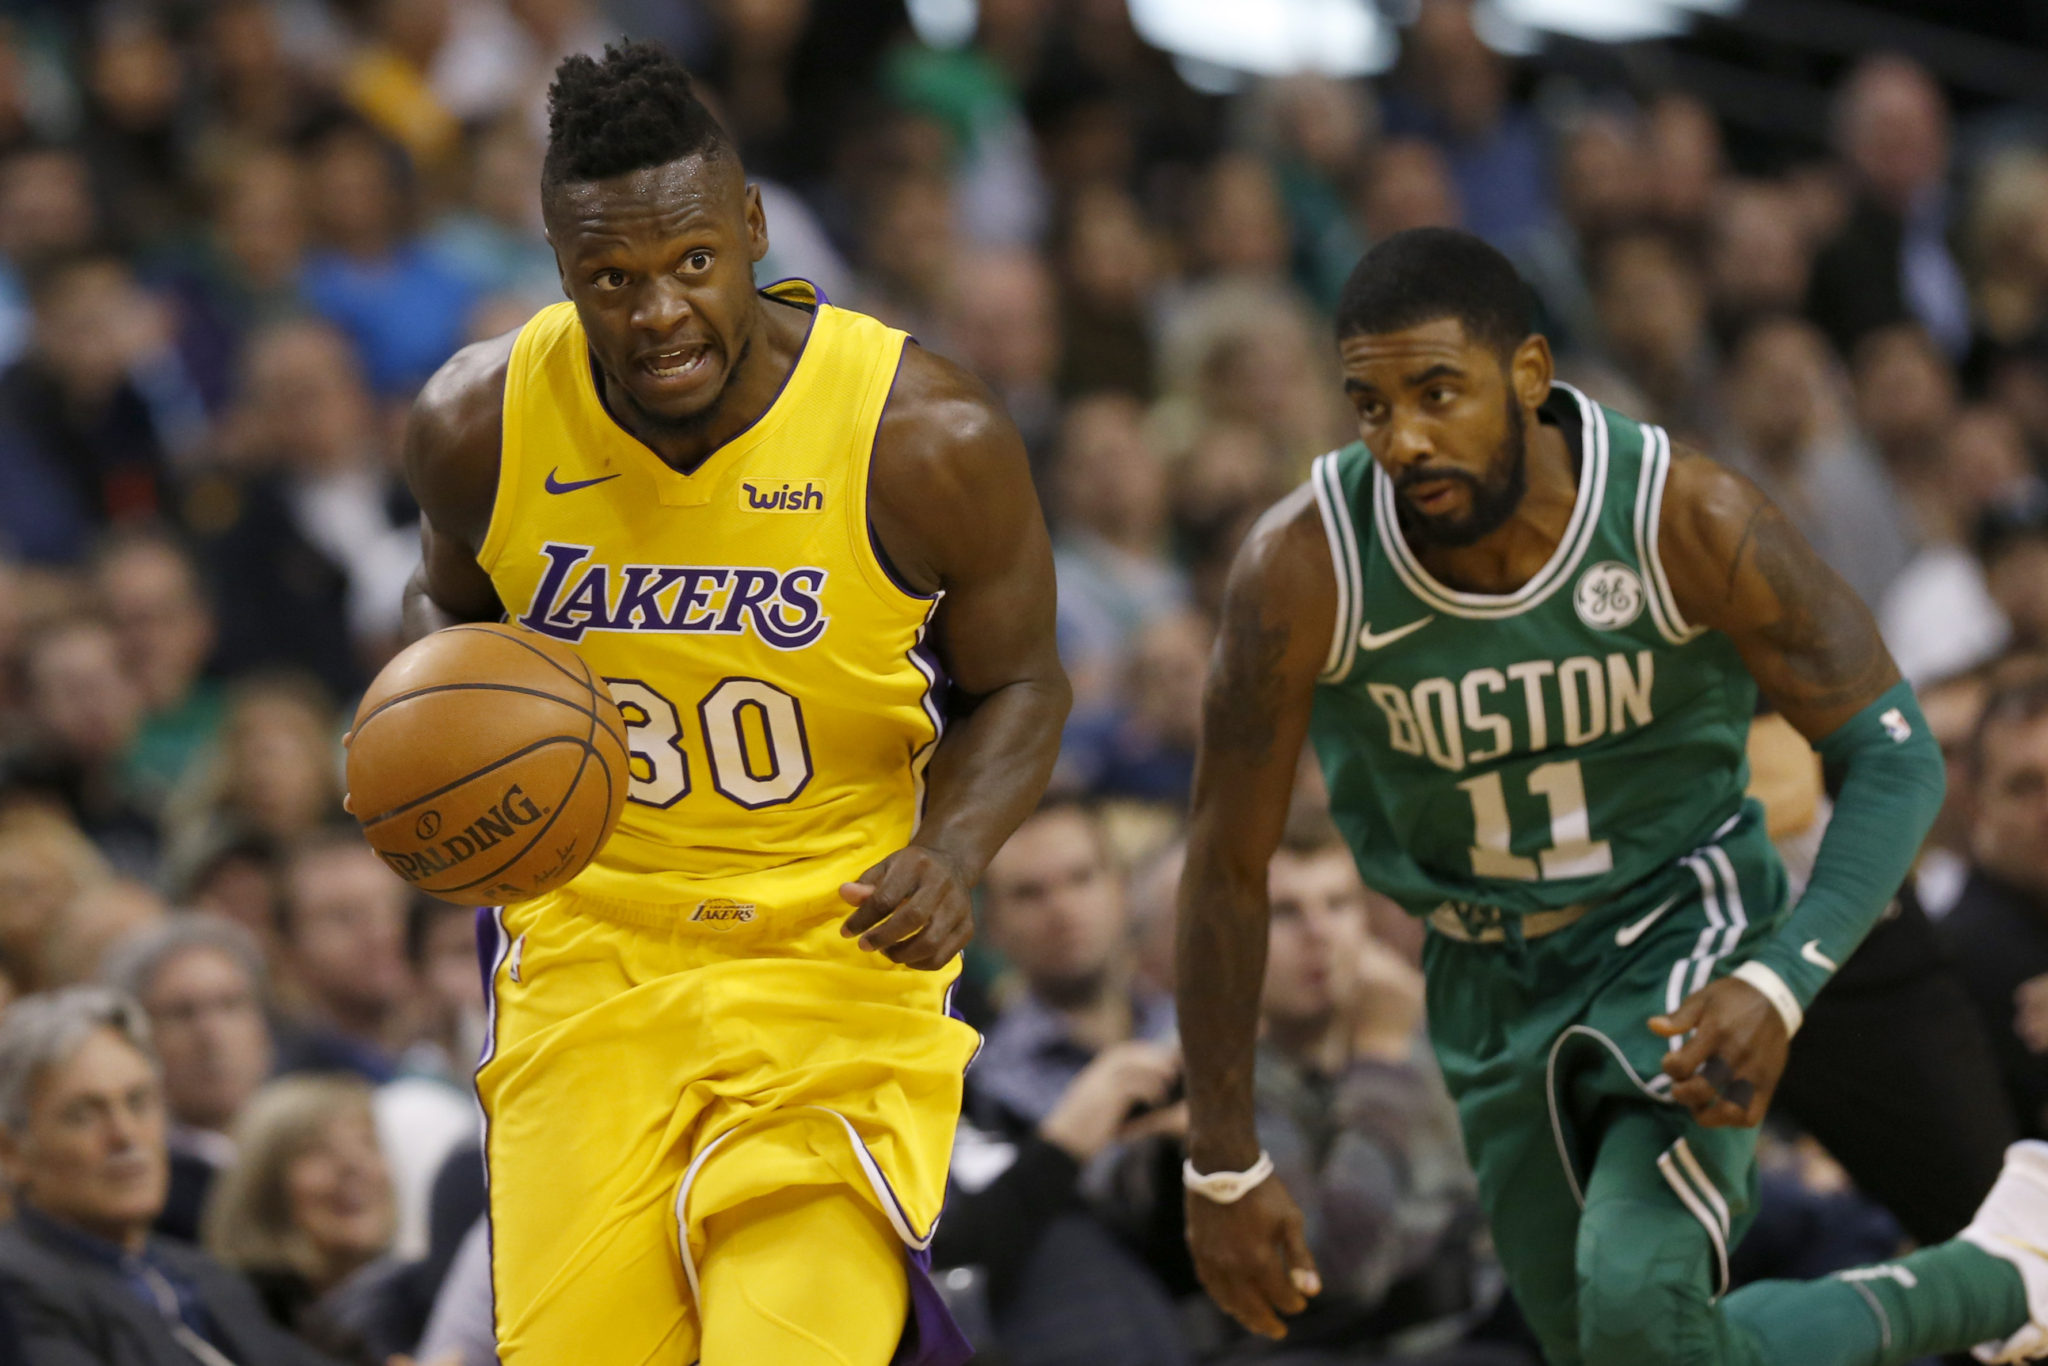 The Rundown: Celtics win without Horford and Tatum, Lonzo shooting historically bad ...